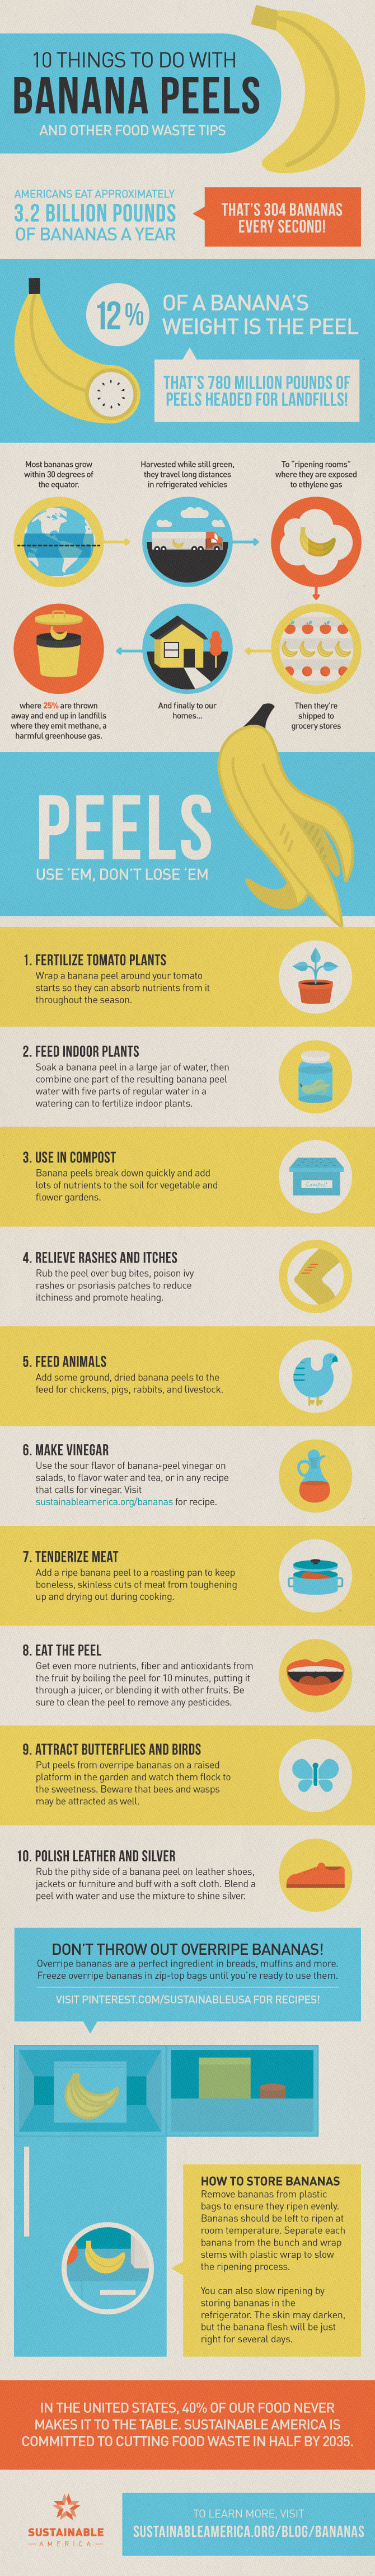 10 Things to Do With Banana Peels Infographic